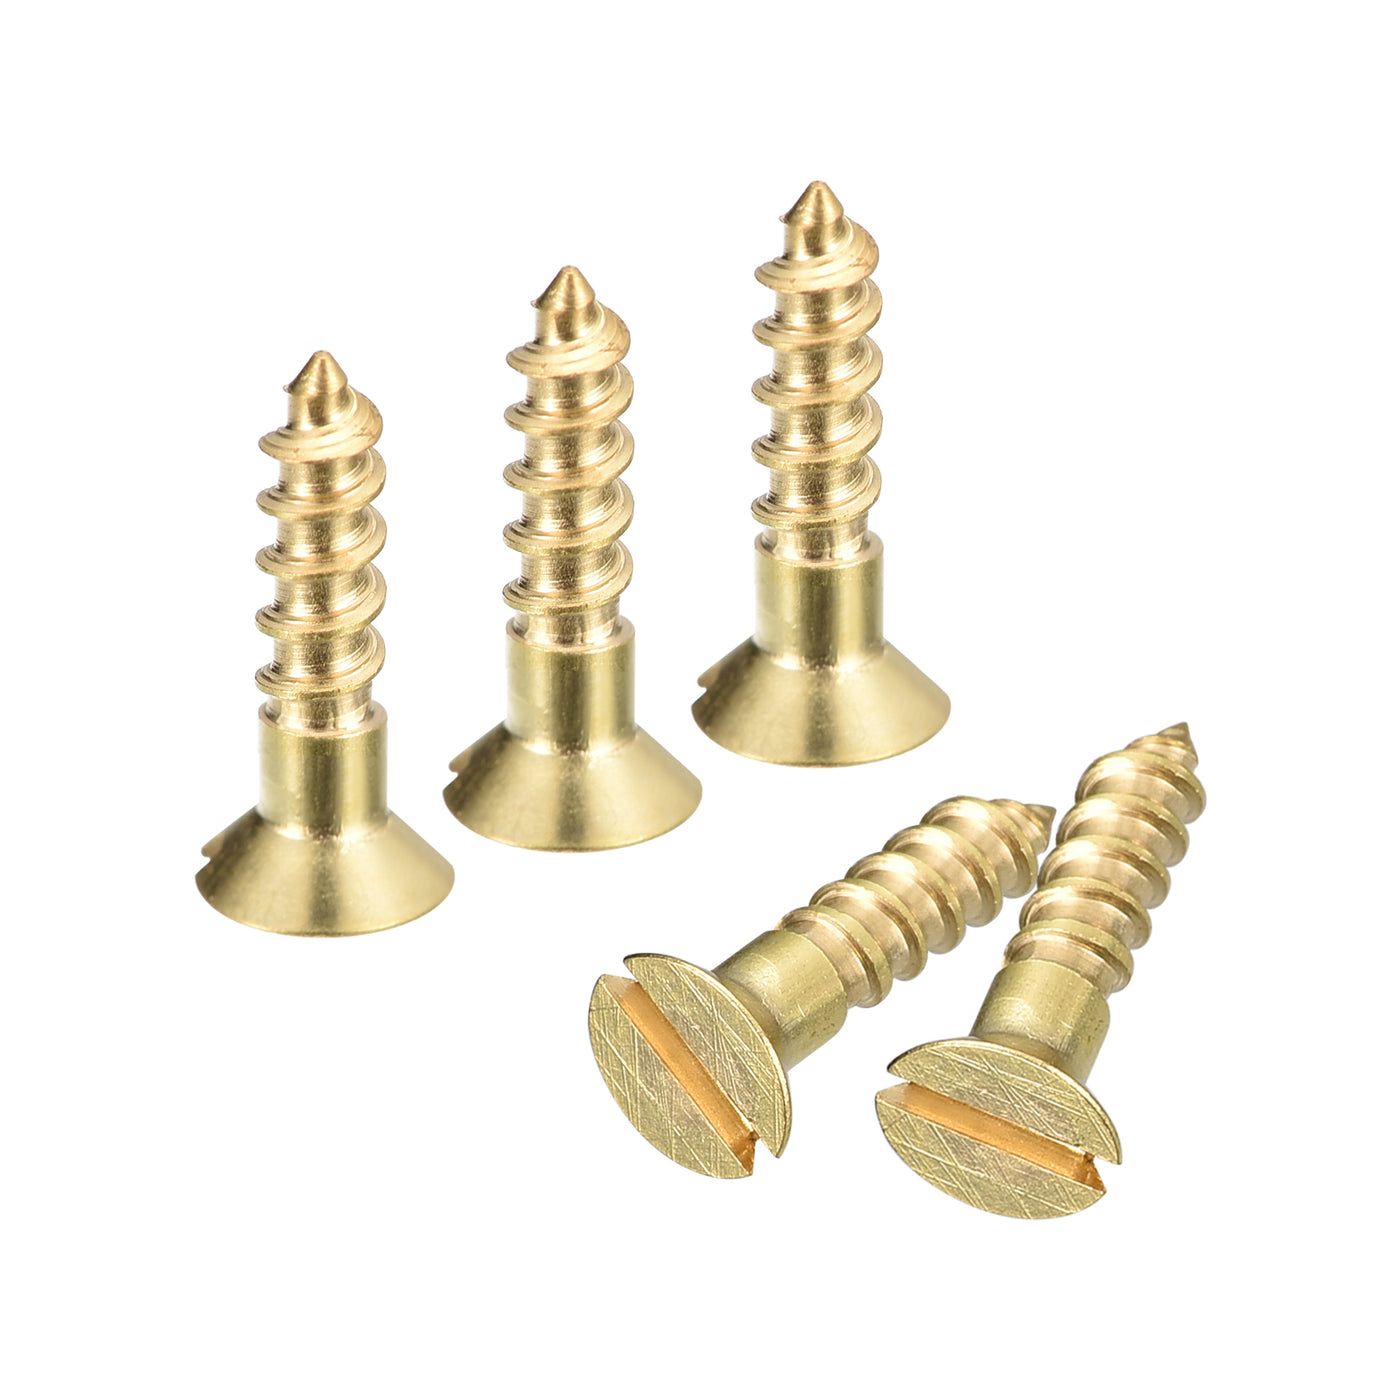 uxcell Uxcell 100Pcs M3 x 12mm Brass Slotted Drive Flat Head Wood Screws Self Tapping Screw